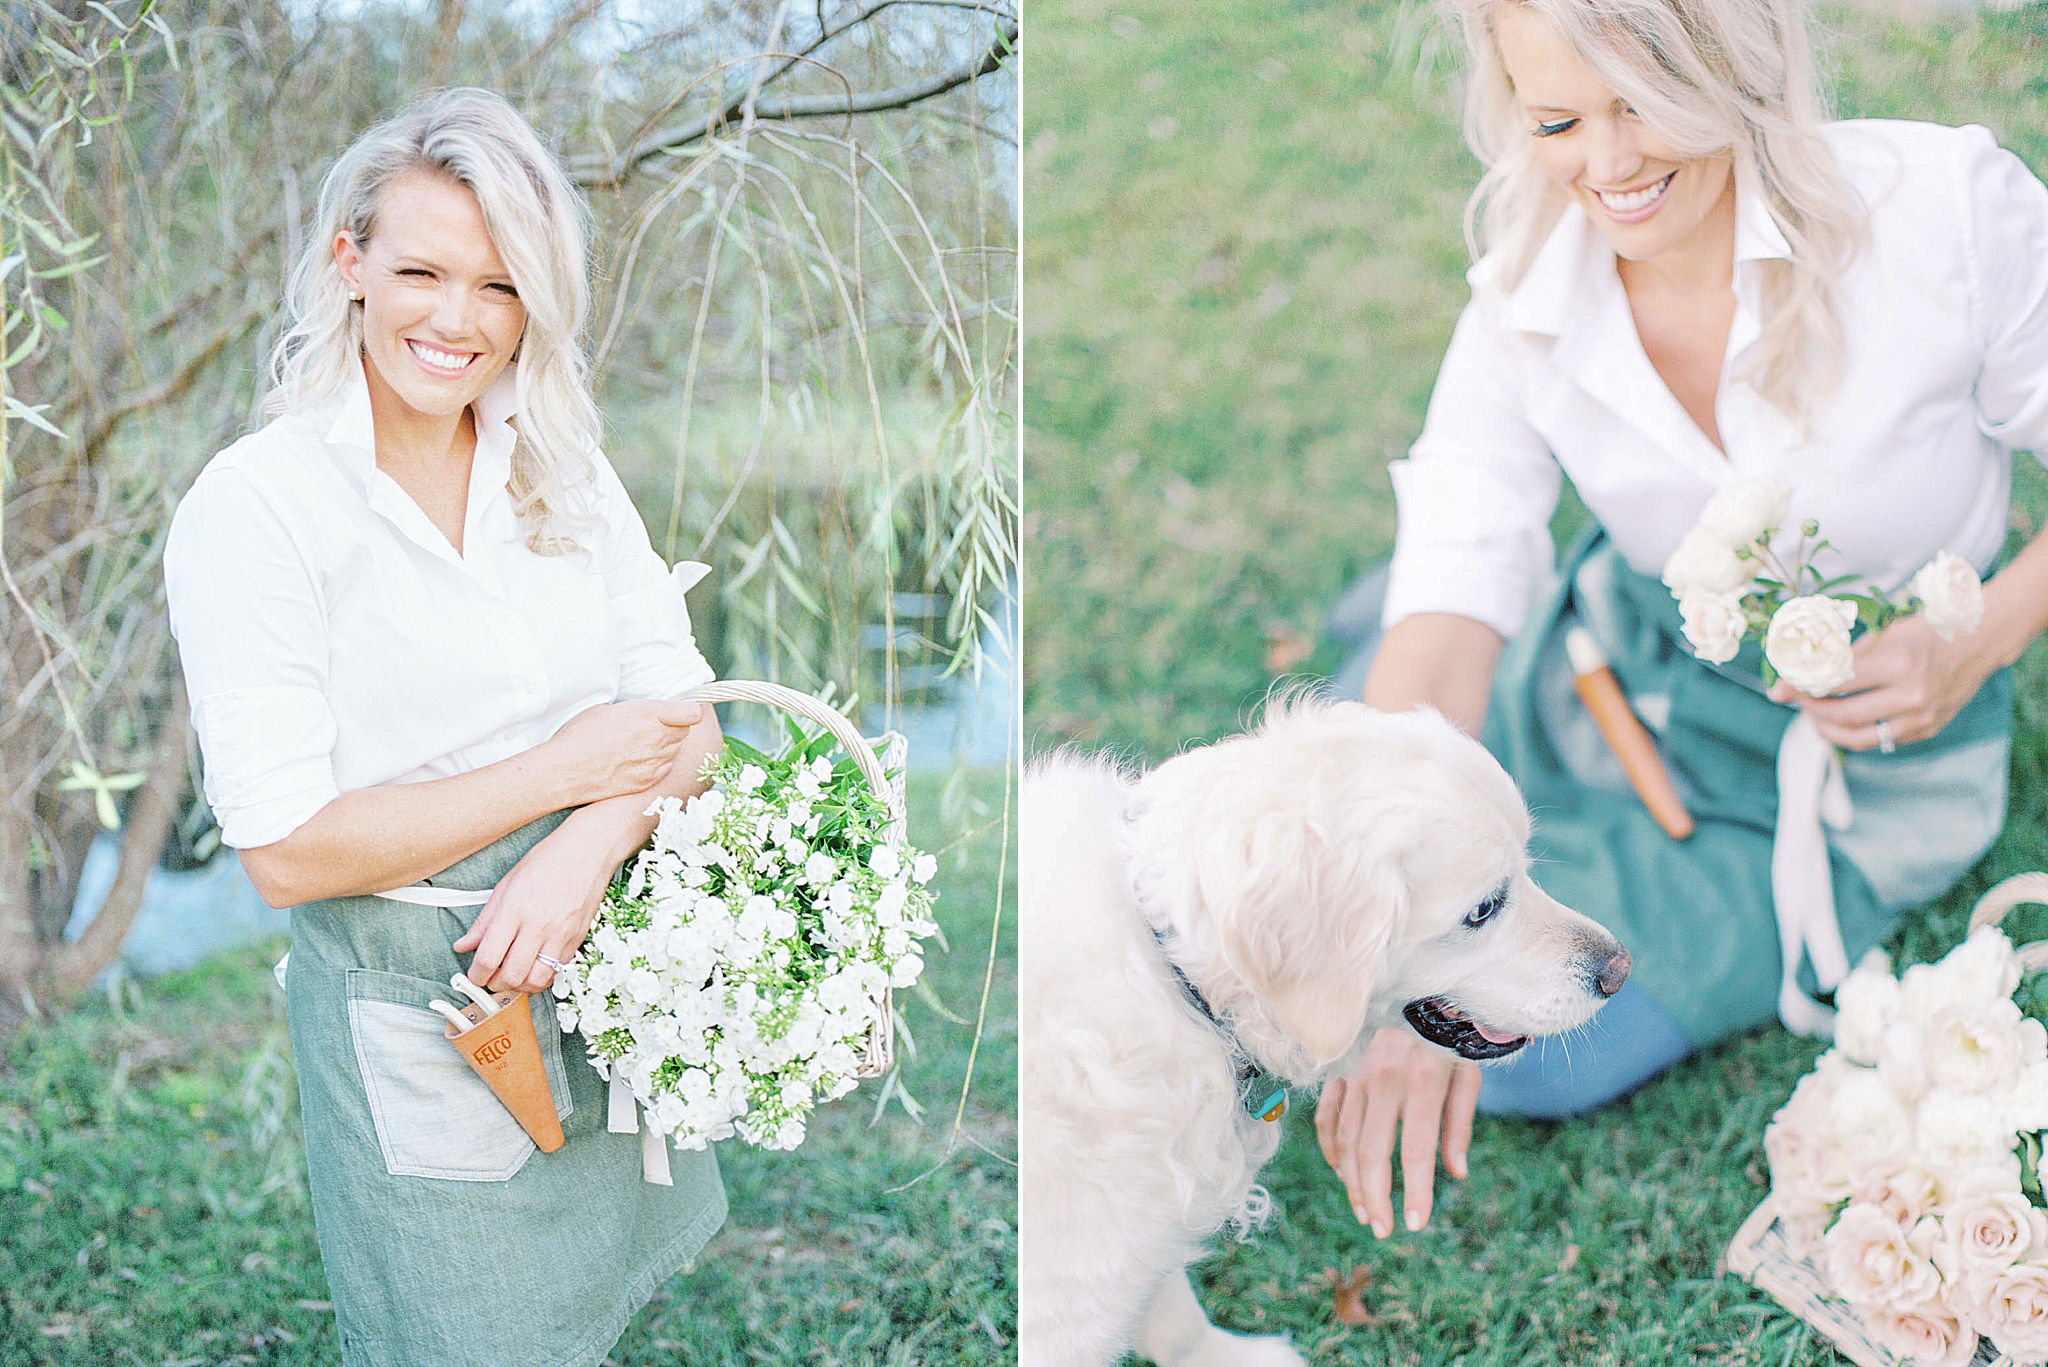 Morning Glory Farm branding session with Demi Mabry